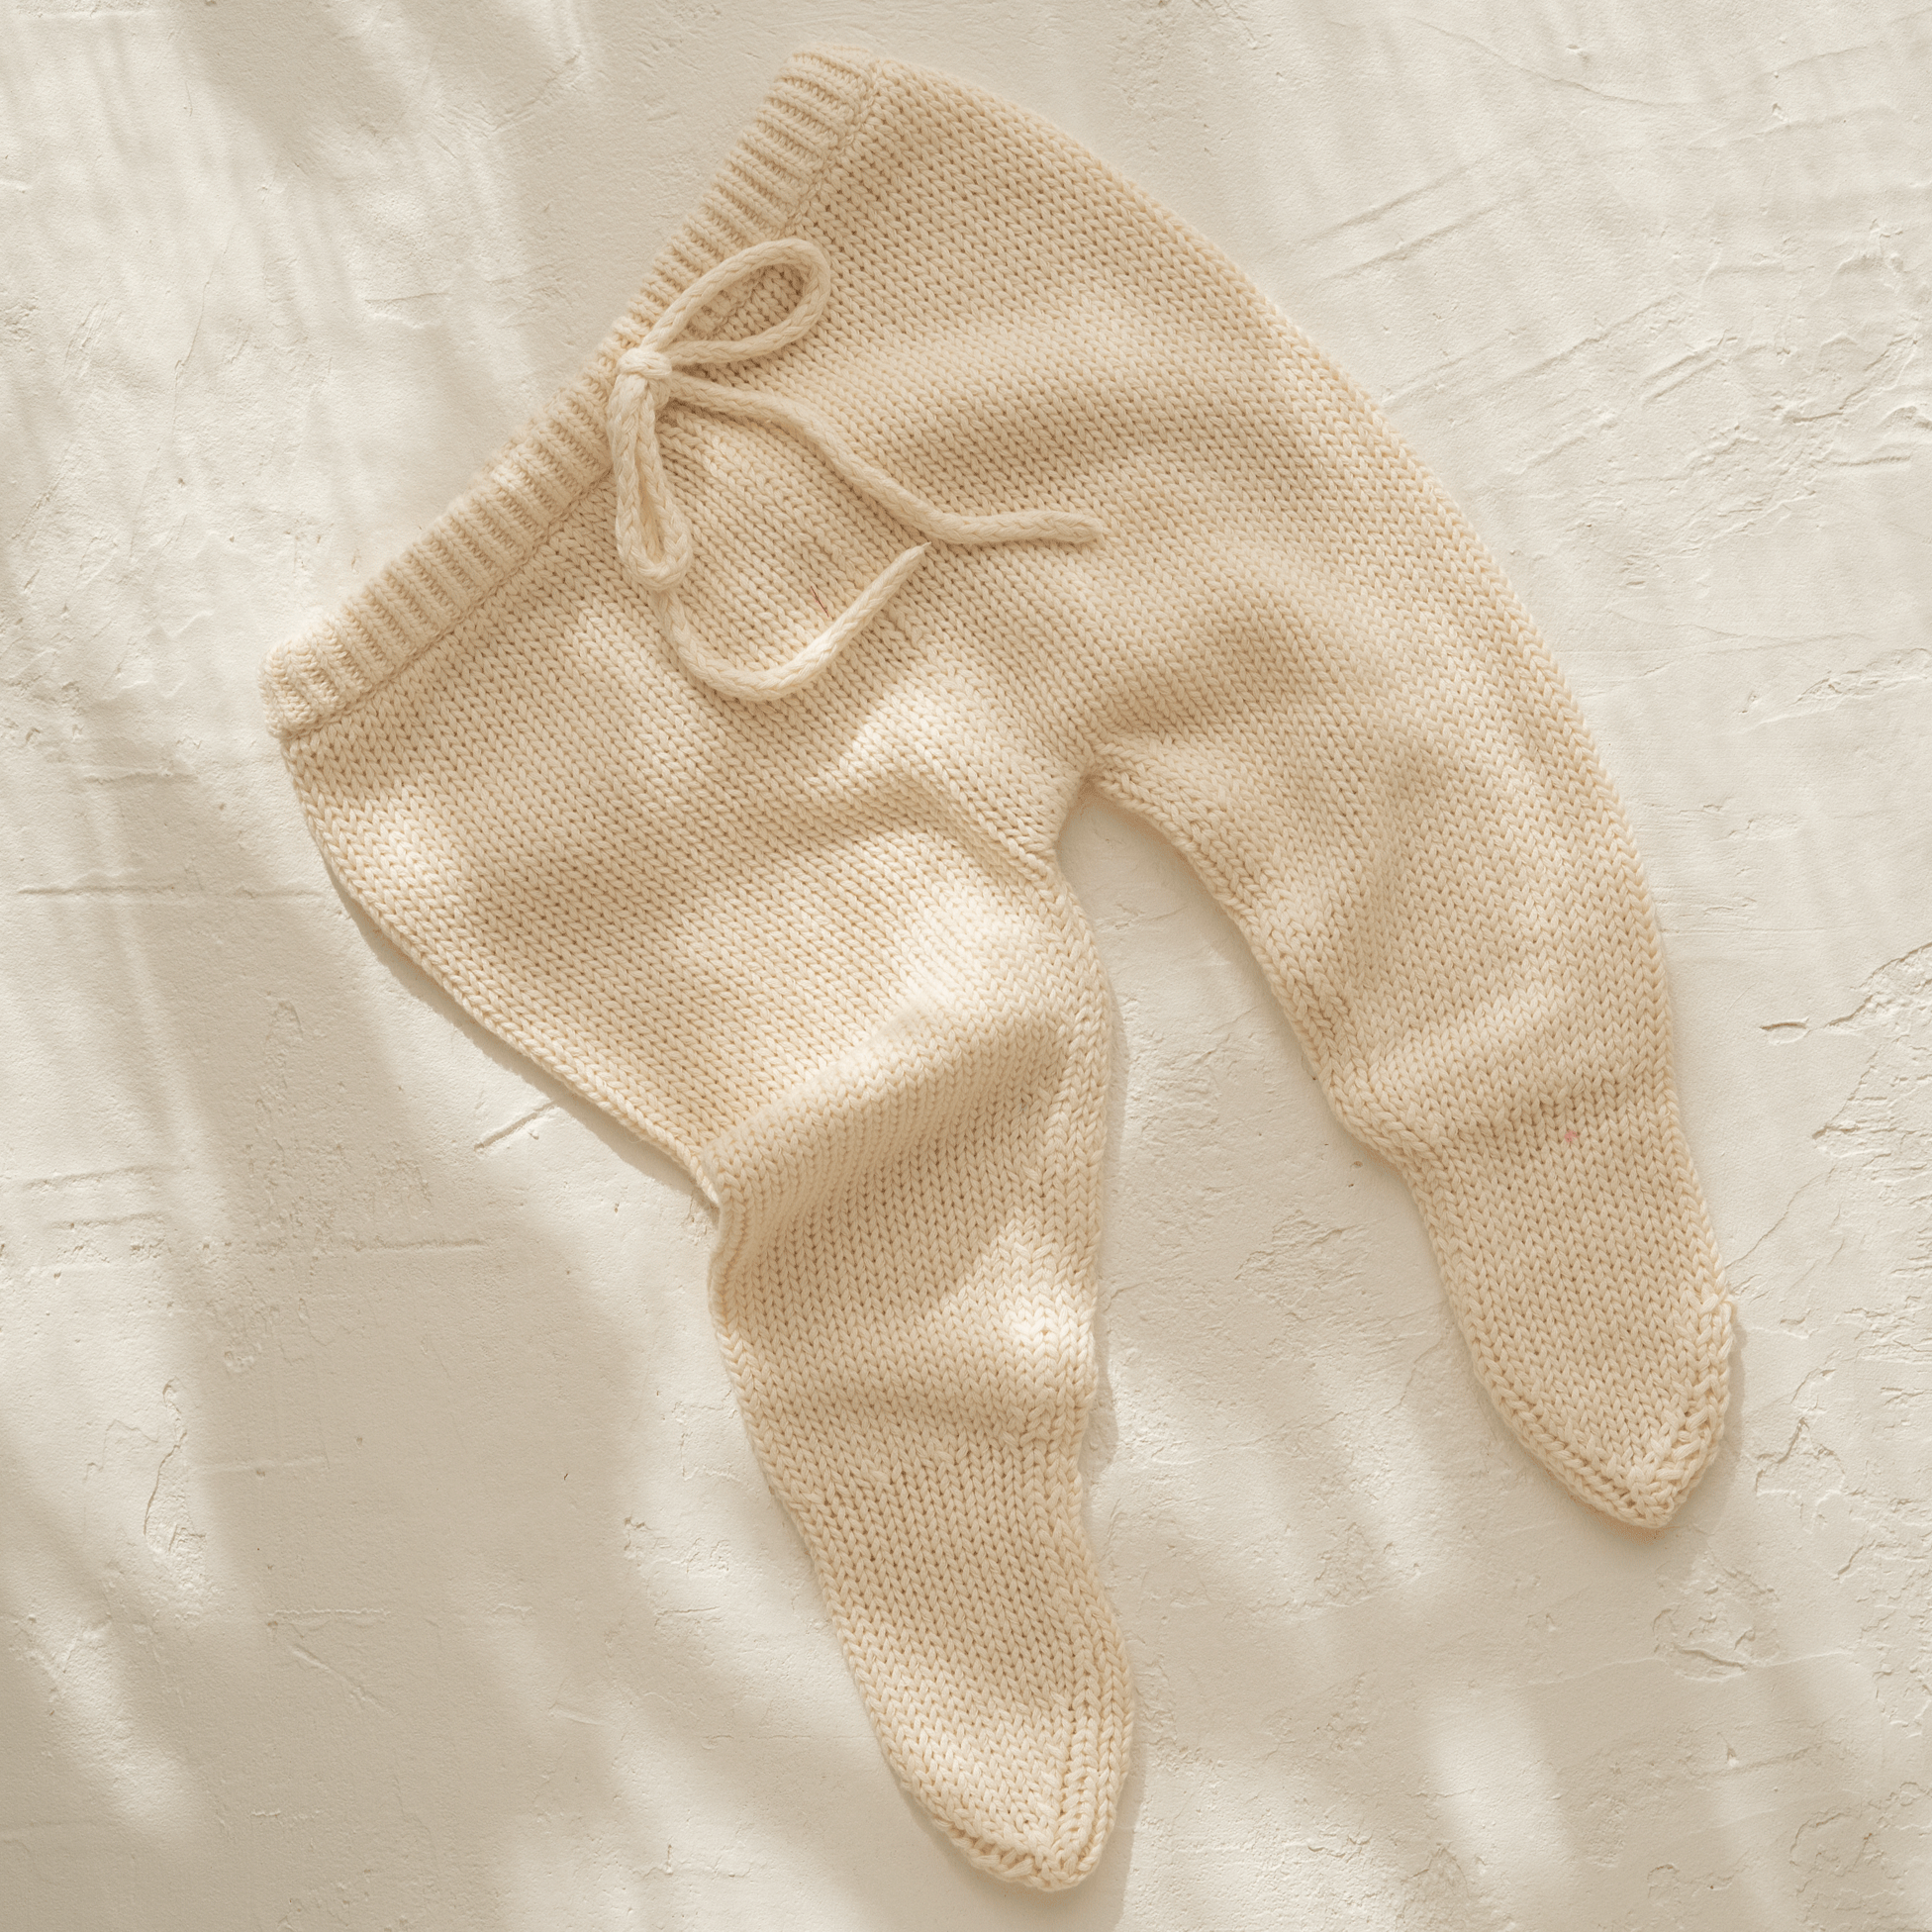 A baby's illoura poet pants in vanilla, from Illoura the Label, laying on a white surface.